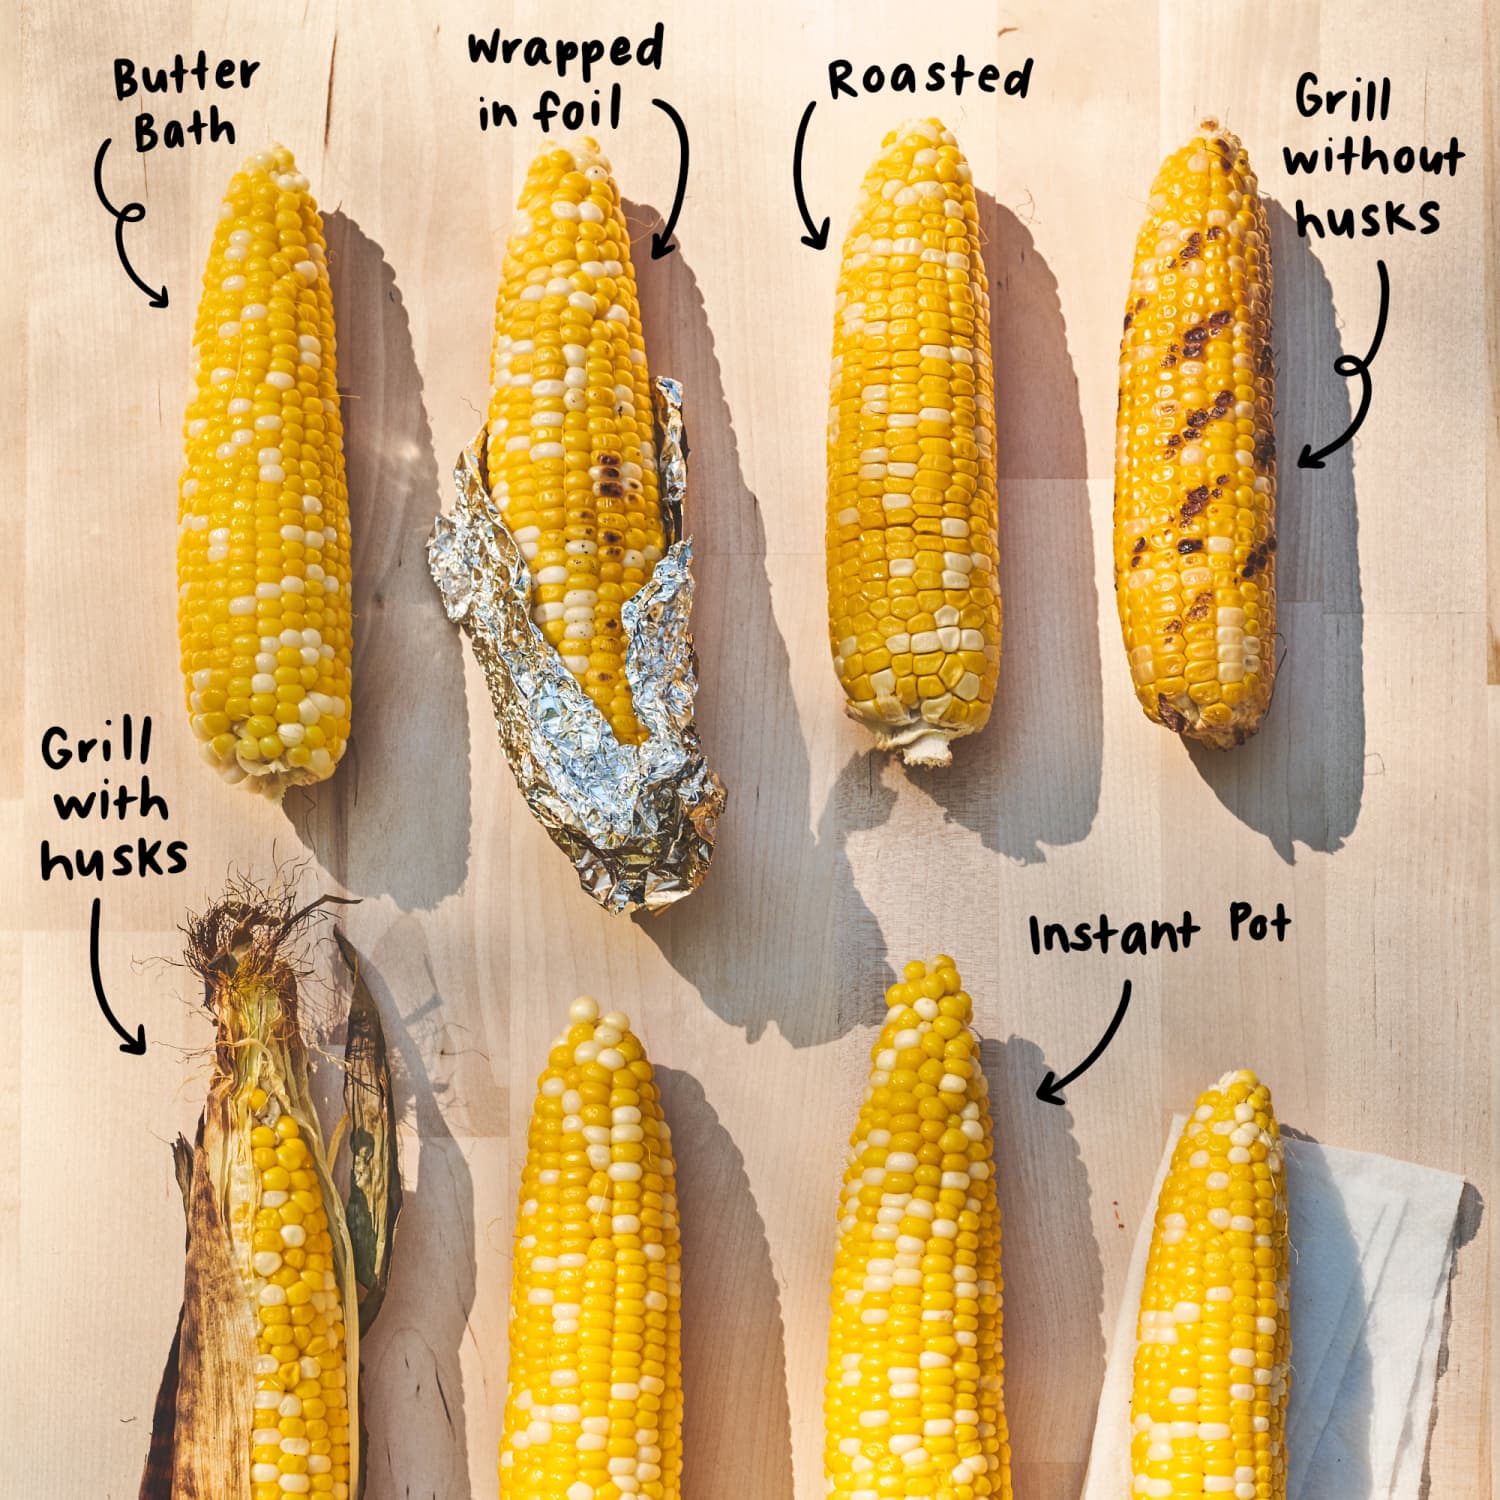 anand raju recommends corn on the cob images pic